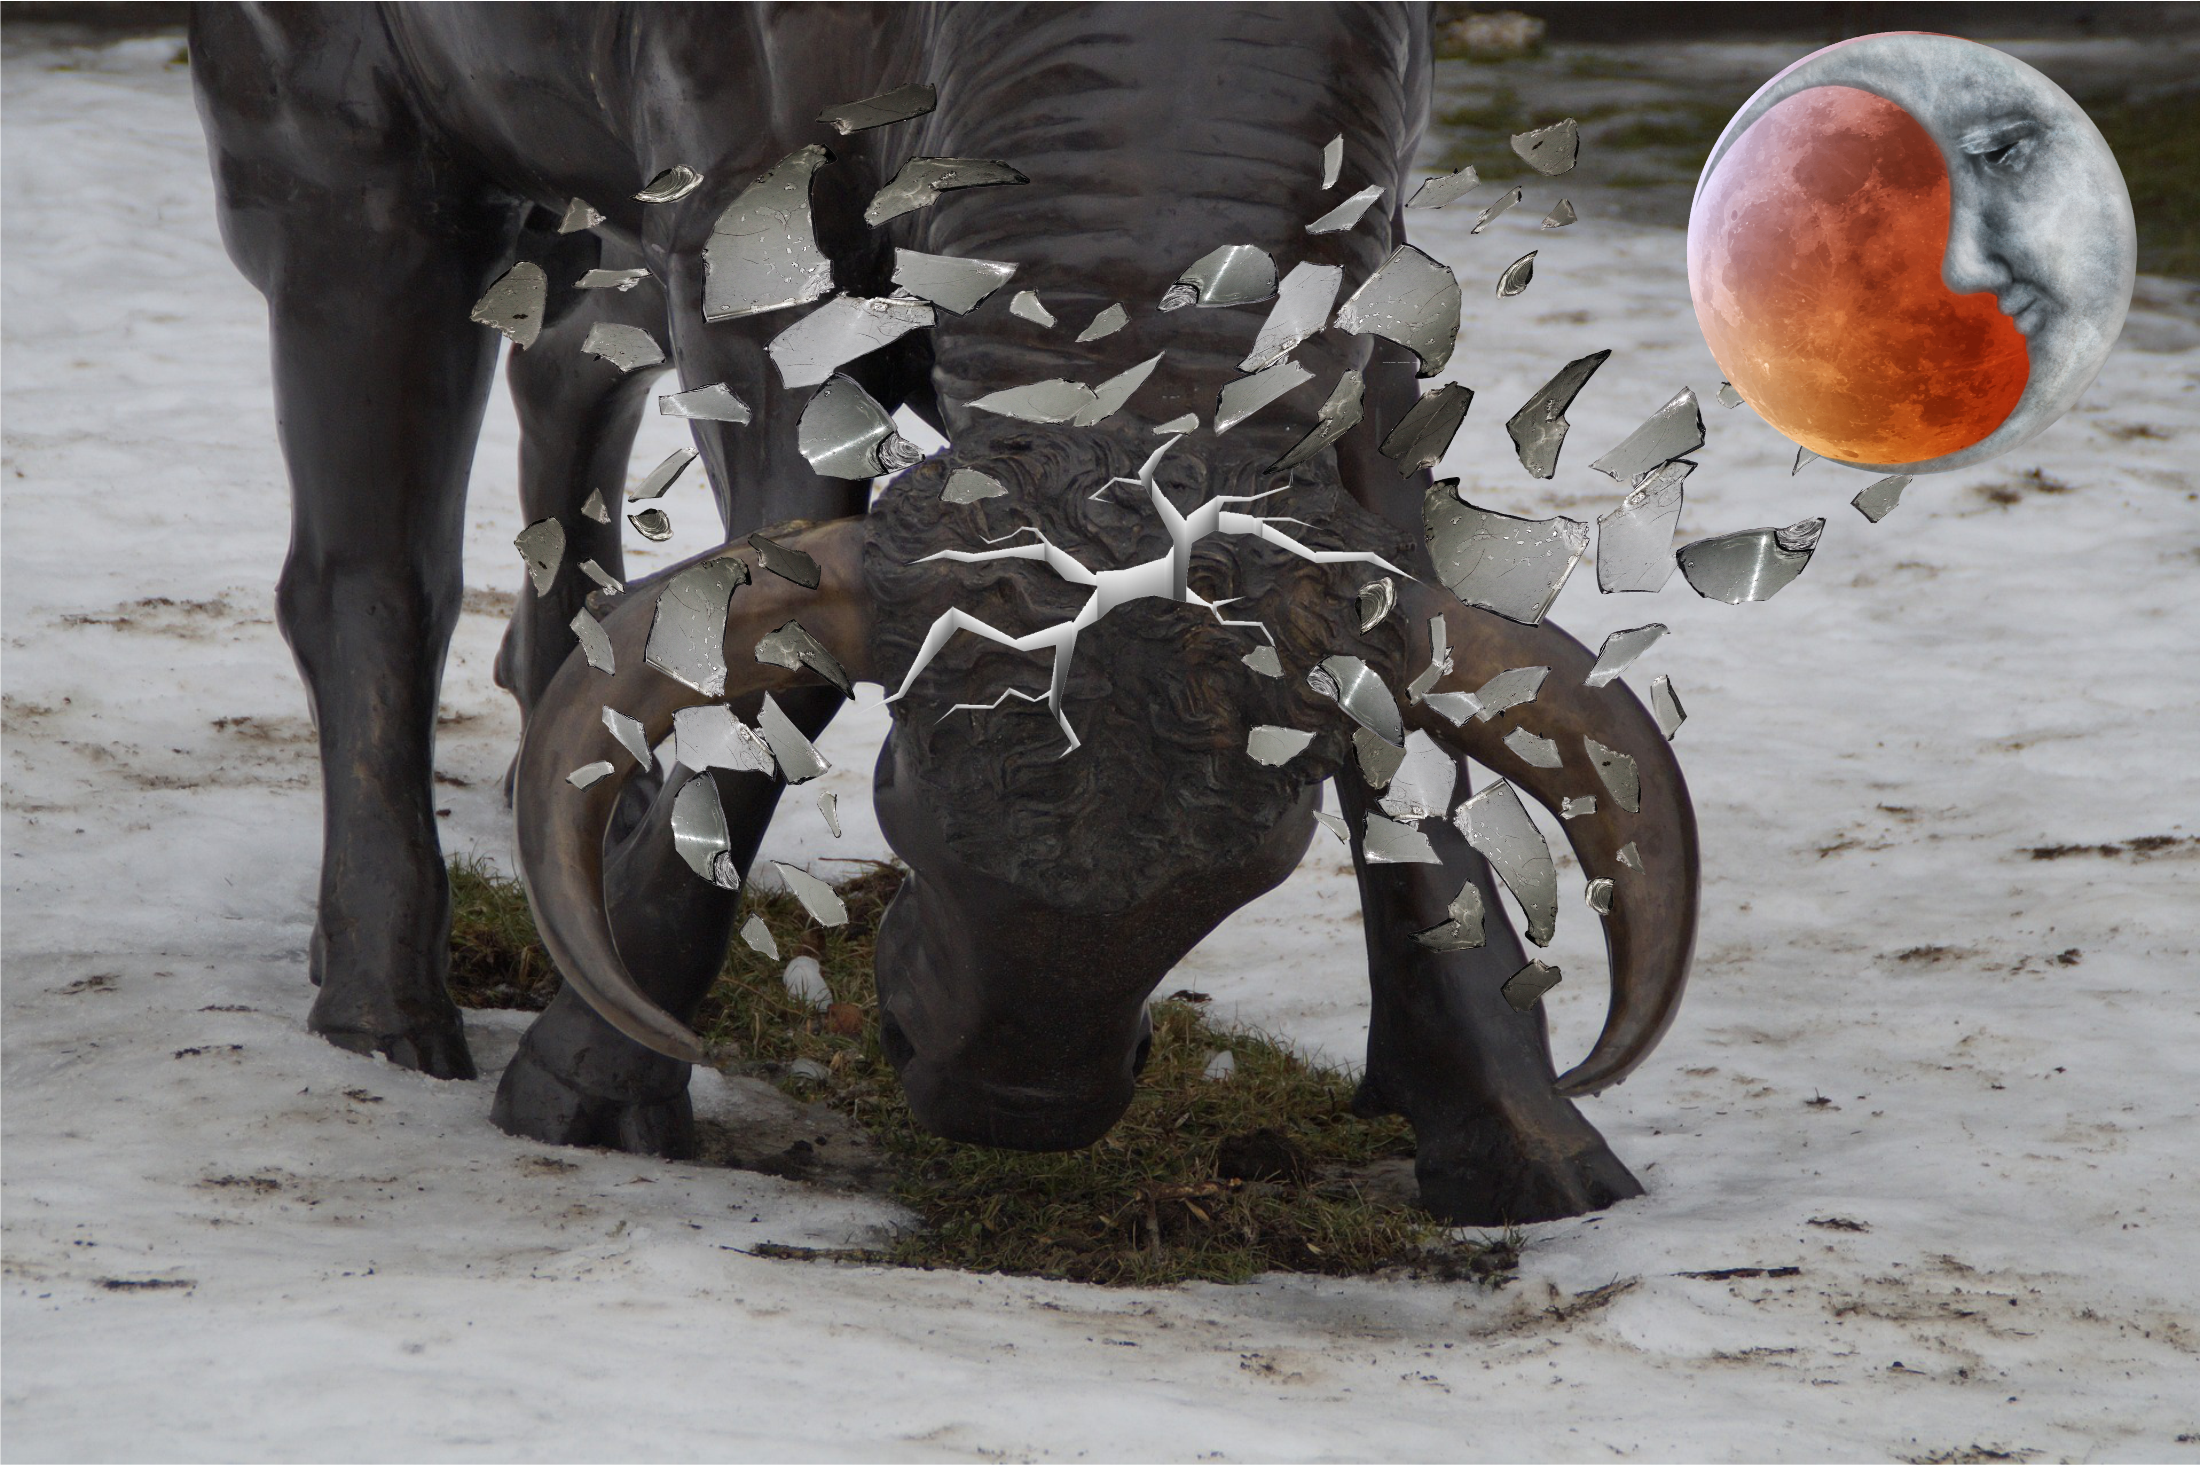 A Bull in a china shop, the Full Moon Lunar Eclipse November 8, 2022